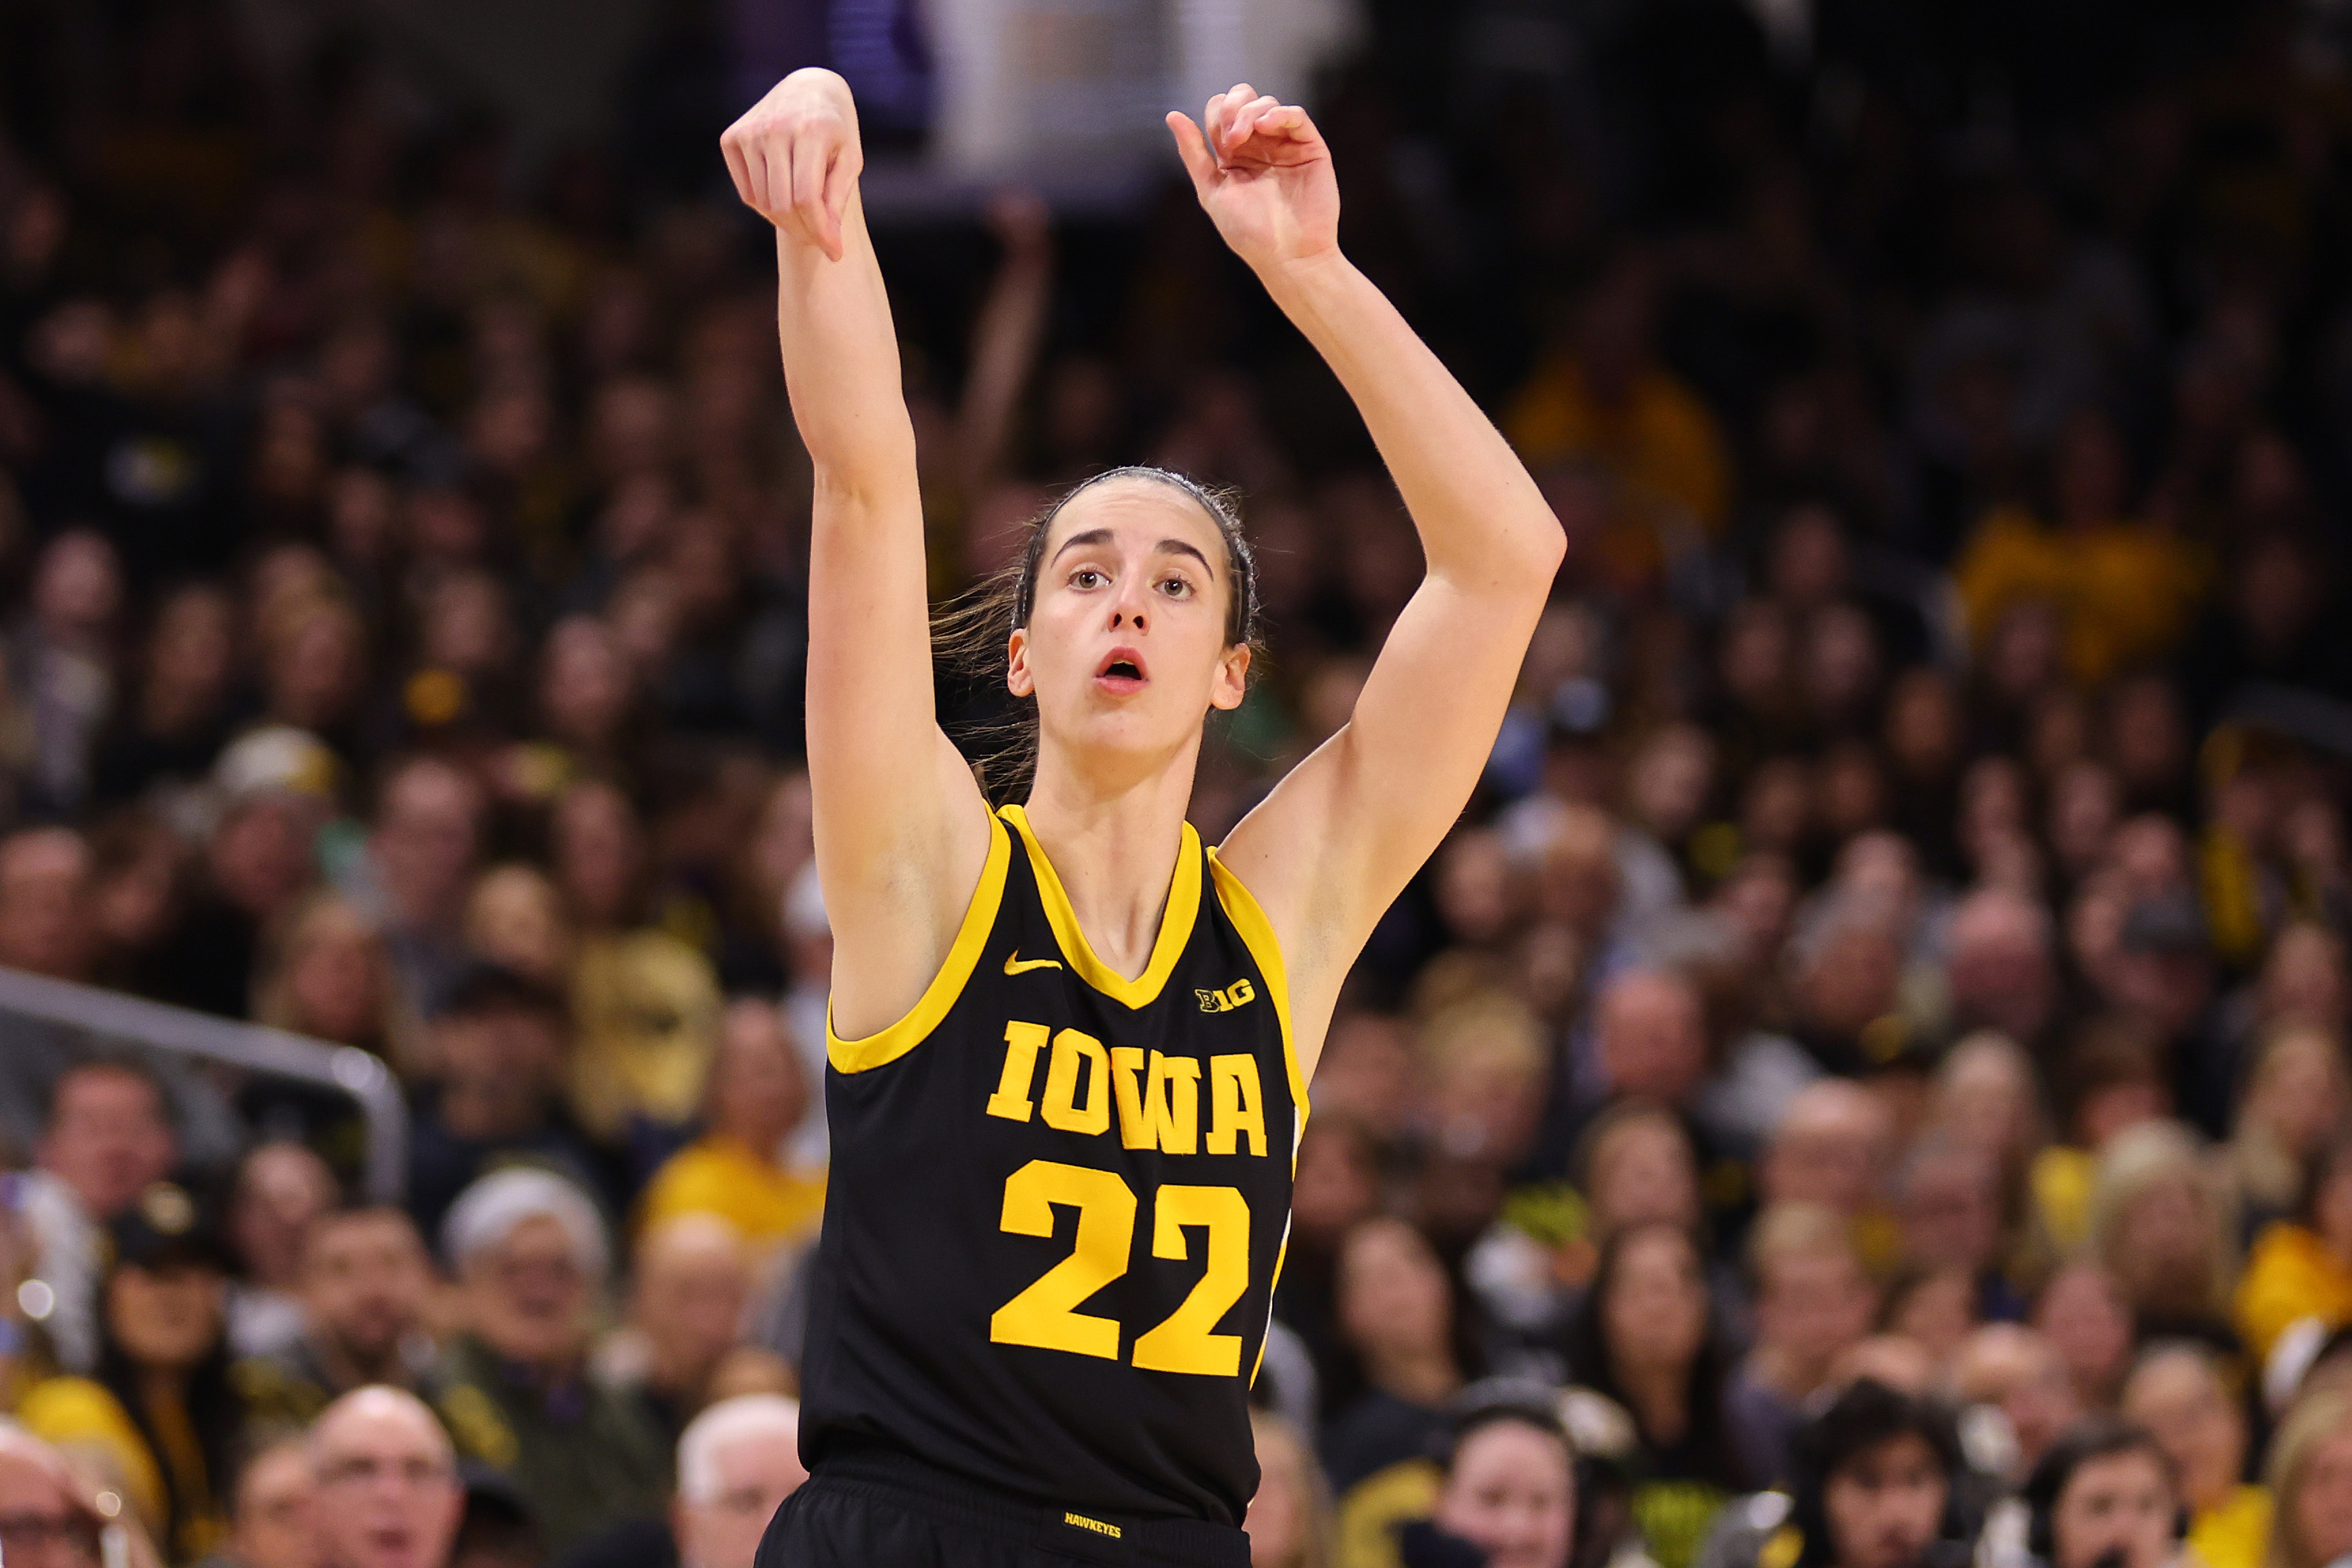 Clark battles injuries, disappointment - The Daily Iowan